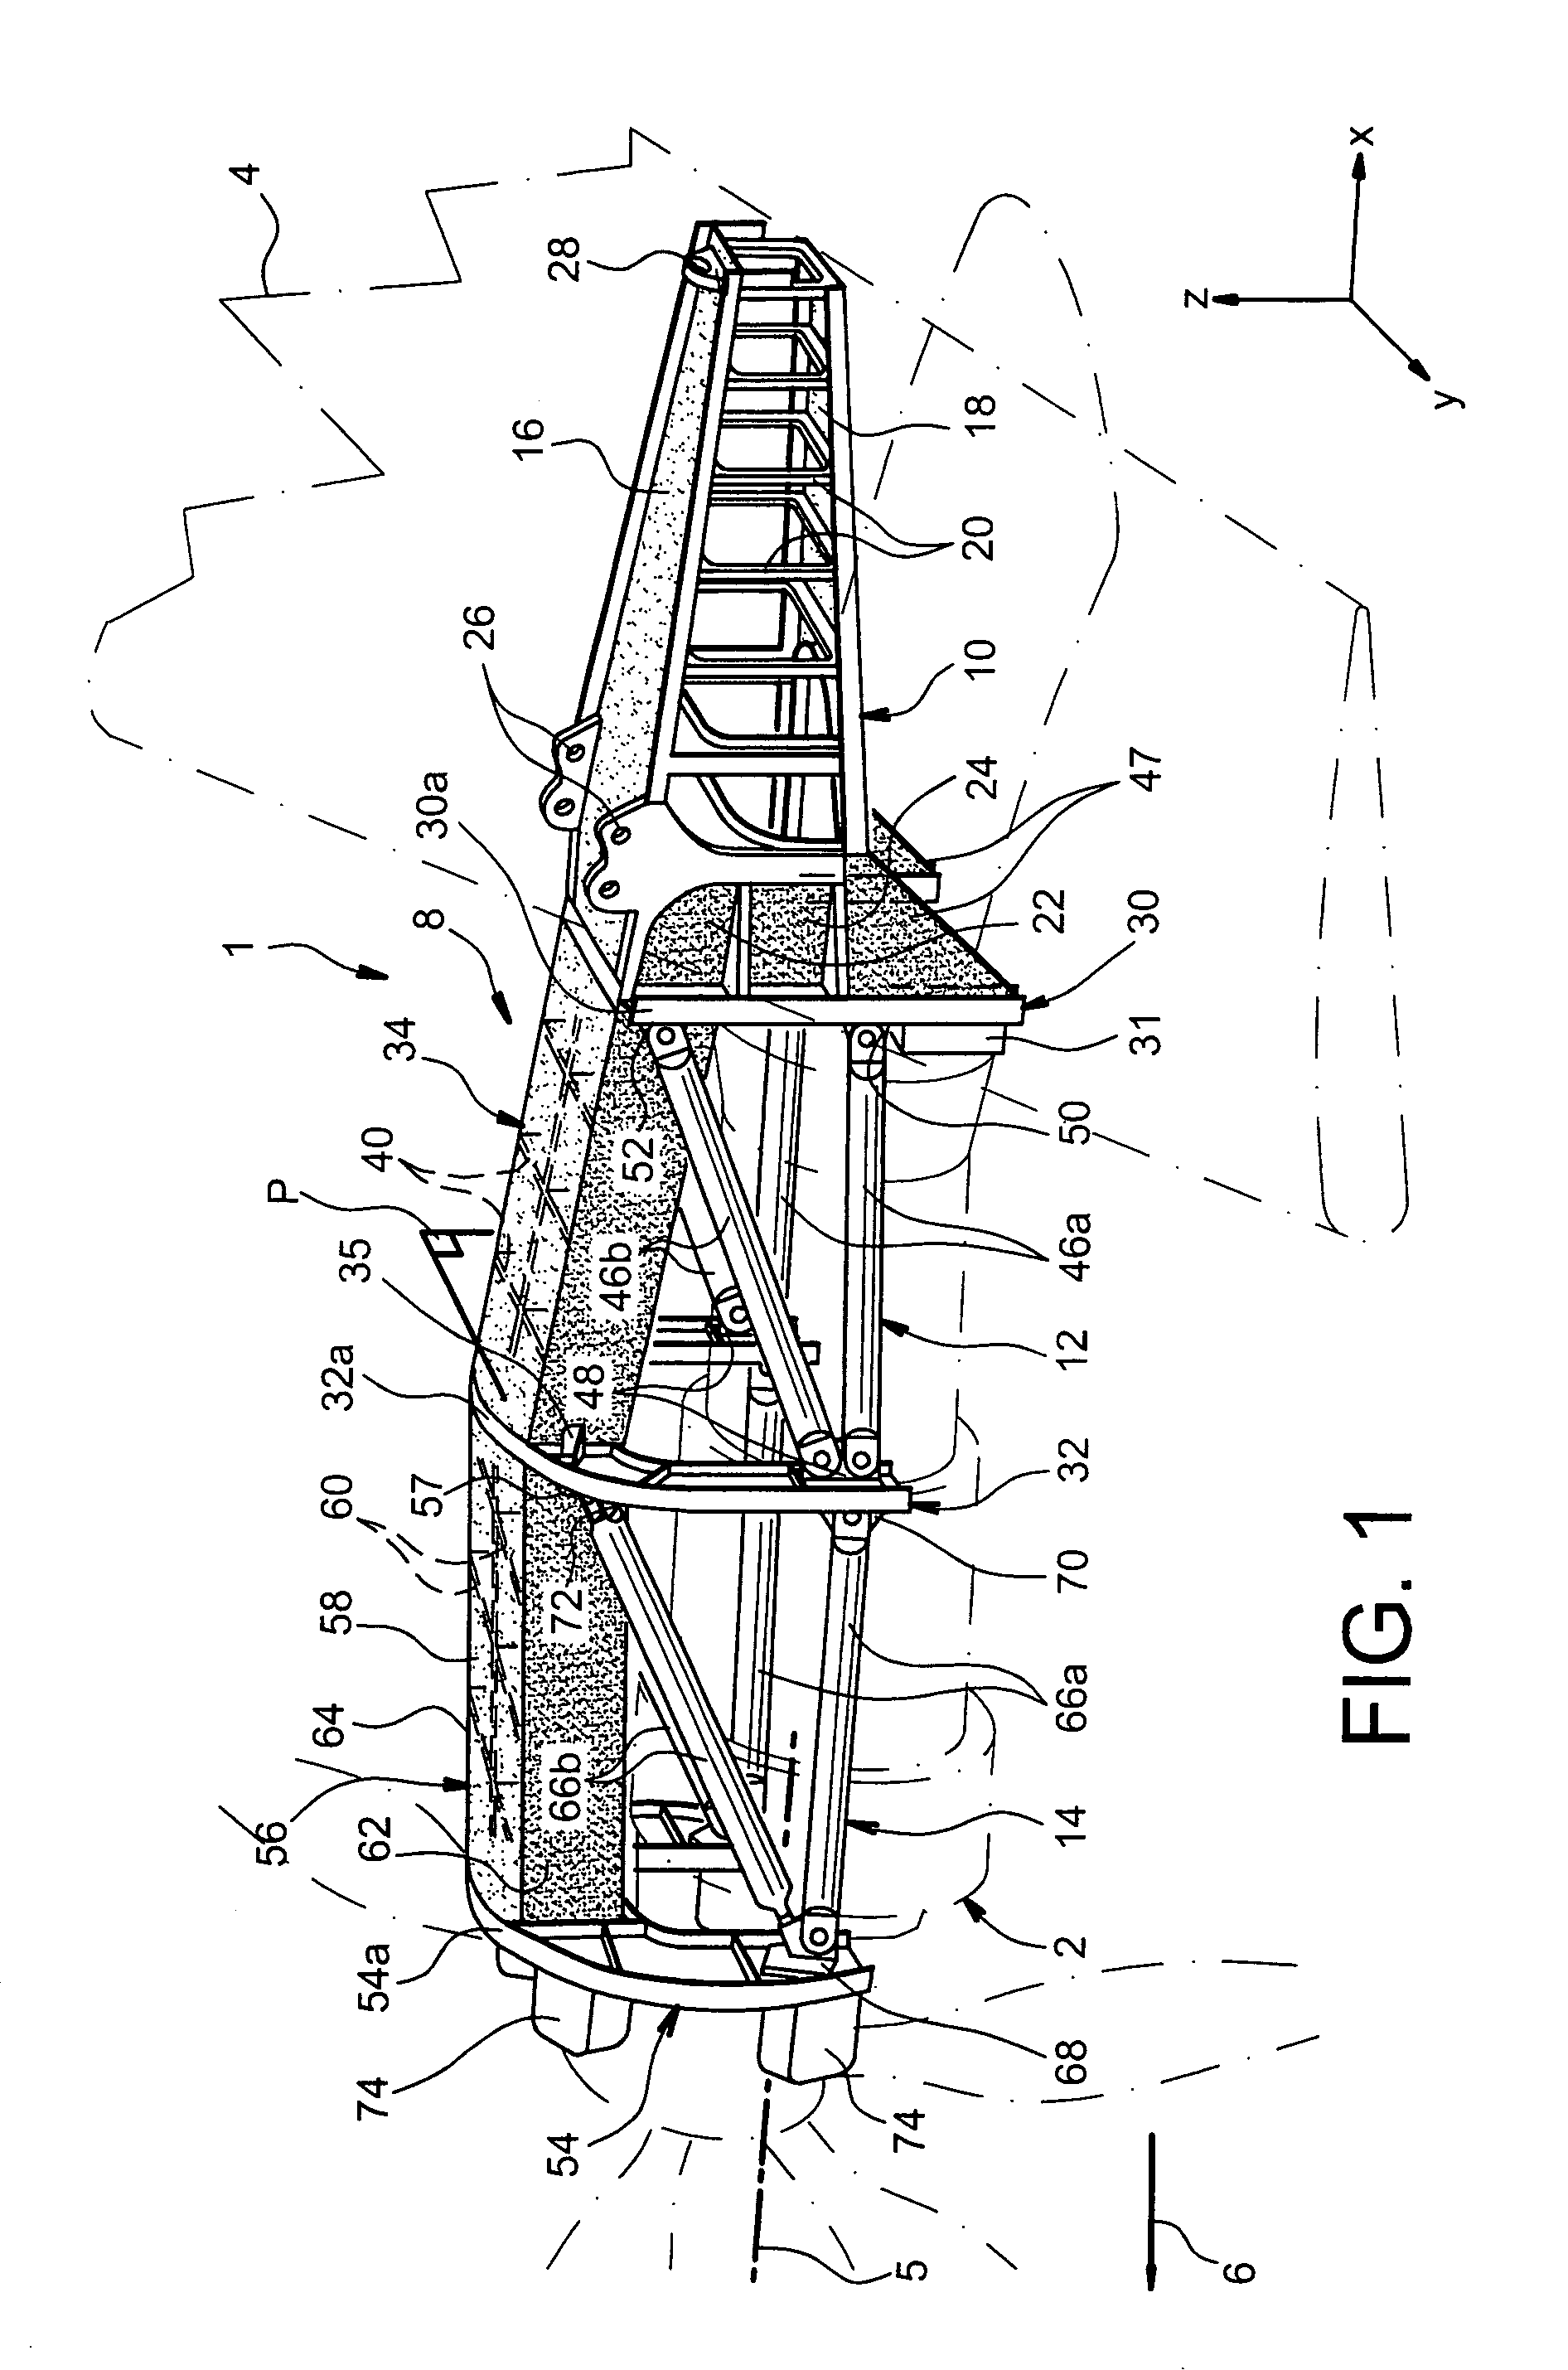 Mounting structure for mounting a turboprop under an aircraft wing